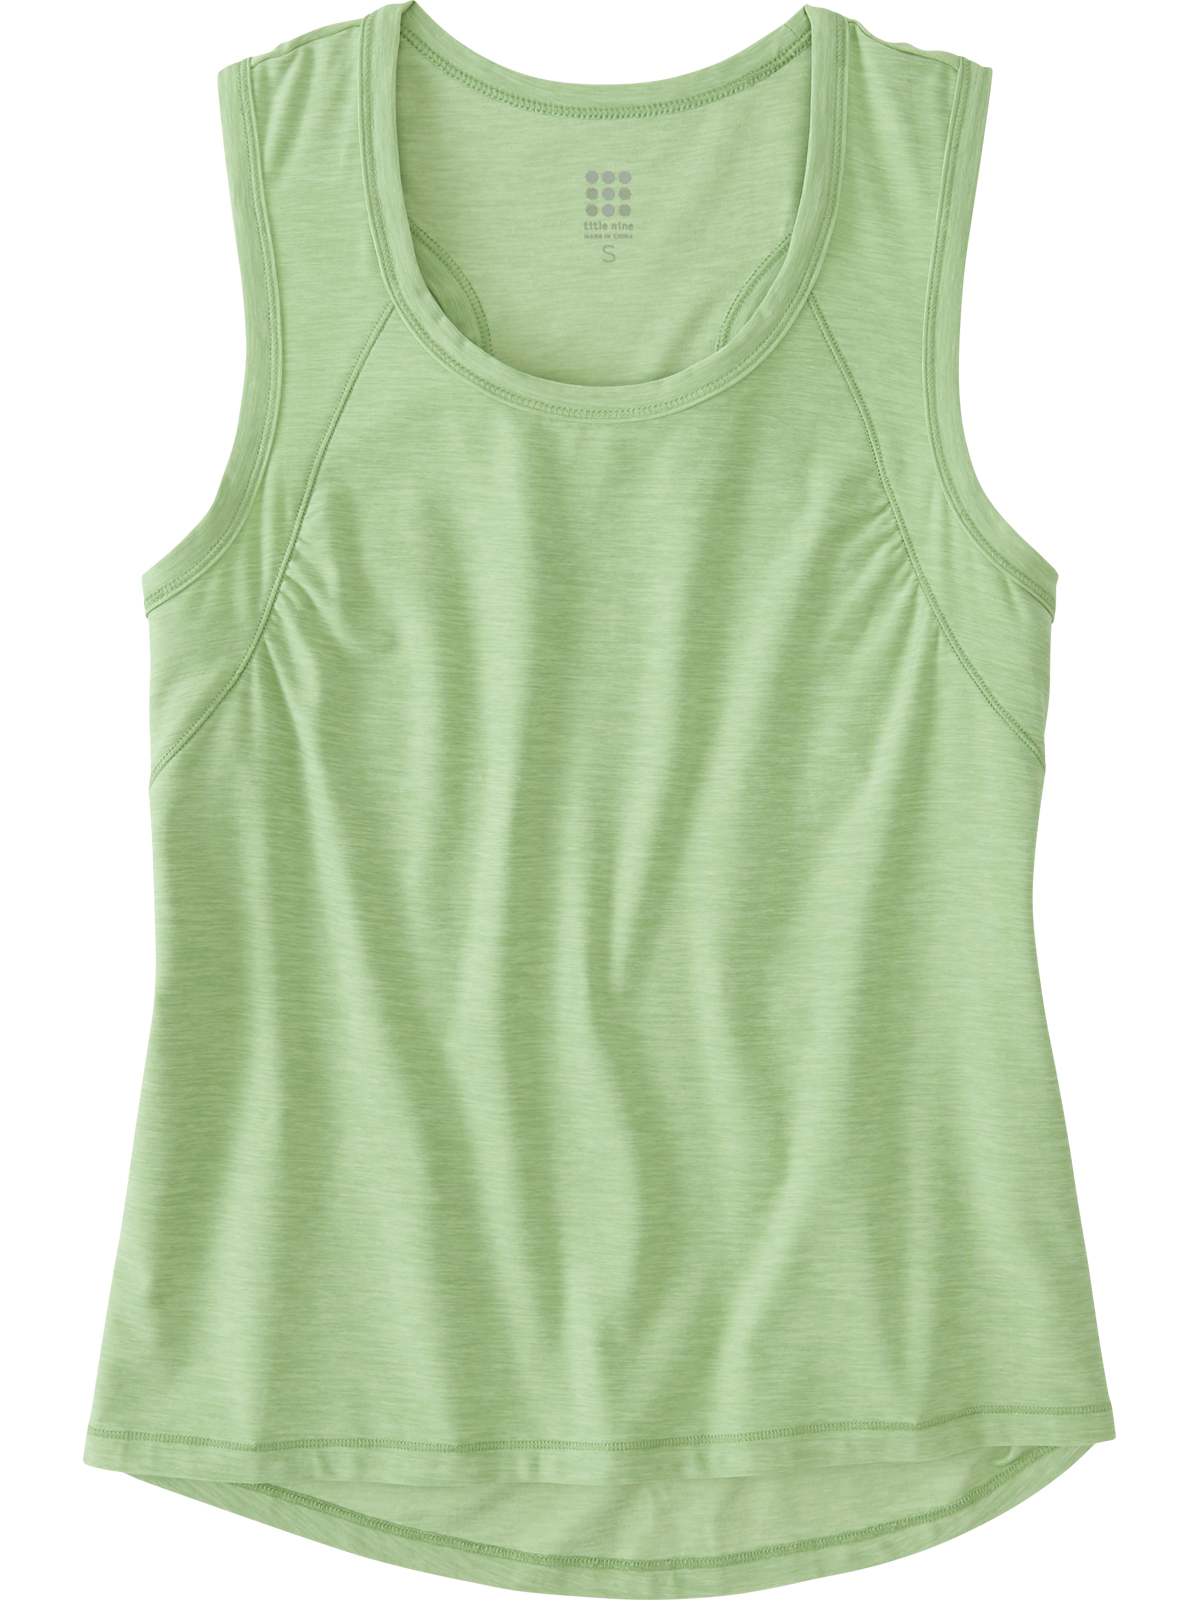 Athletic Tank Top Womens: Endorphin